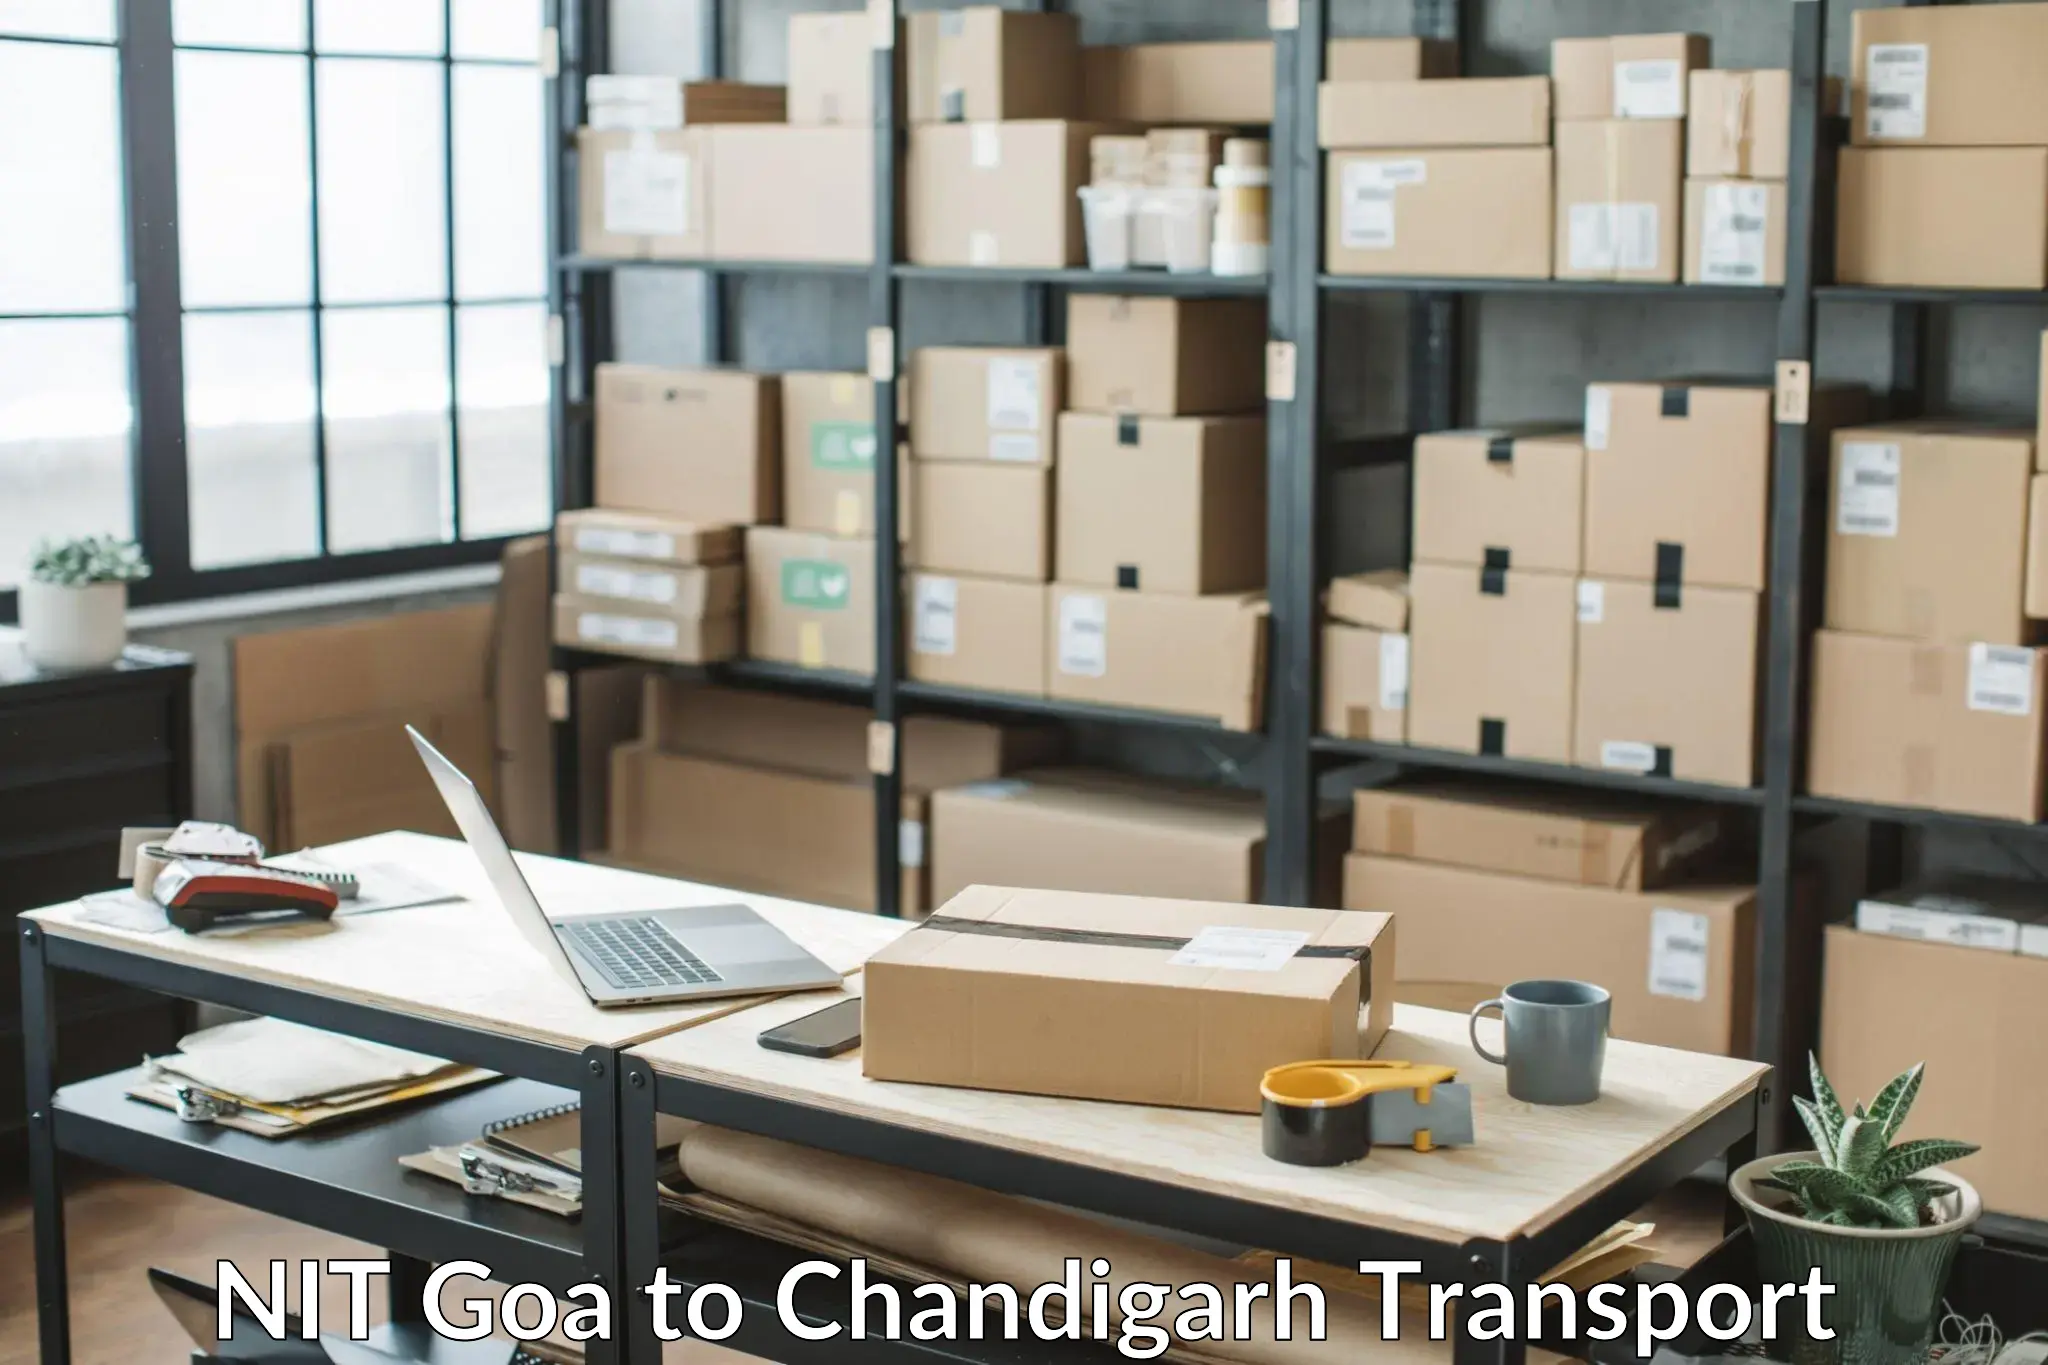 Container transport service NIT Goa to Chandigarh